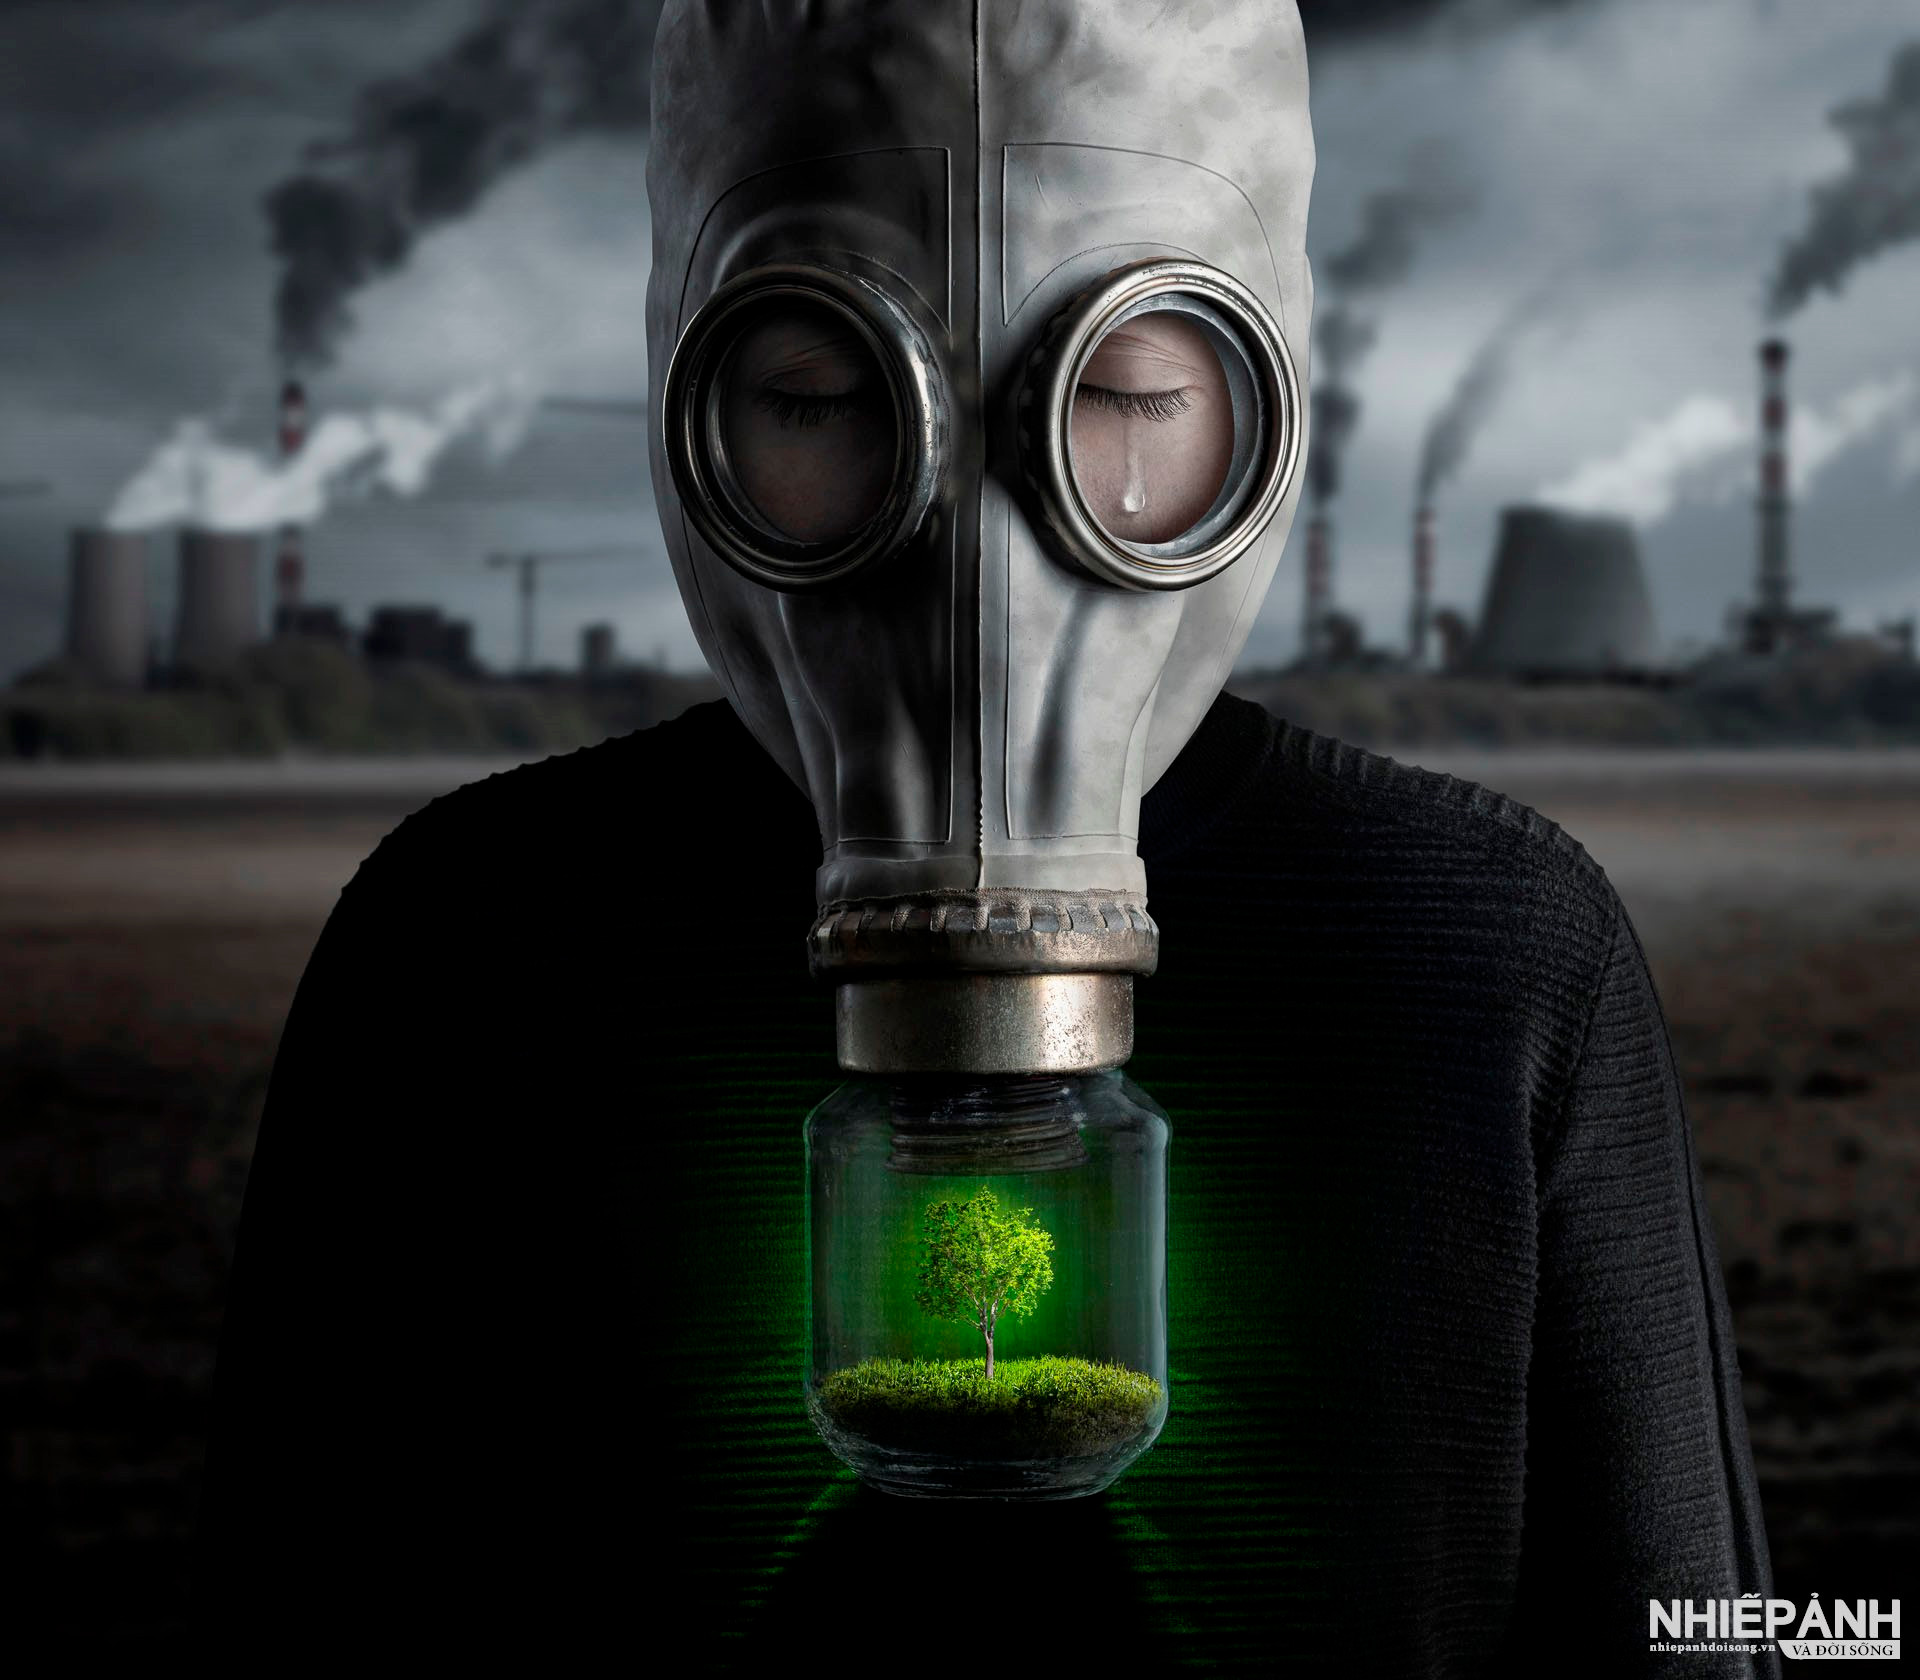 W_7-color-isf-gold-medal-andre-boto-portugal-pollution.jpg